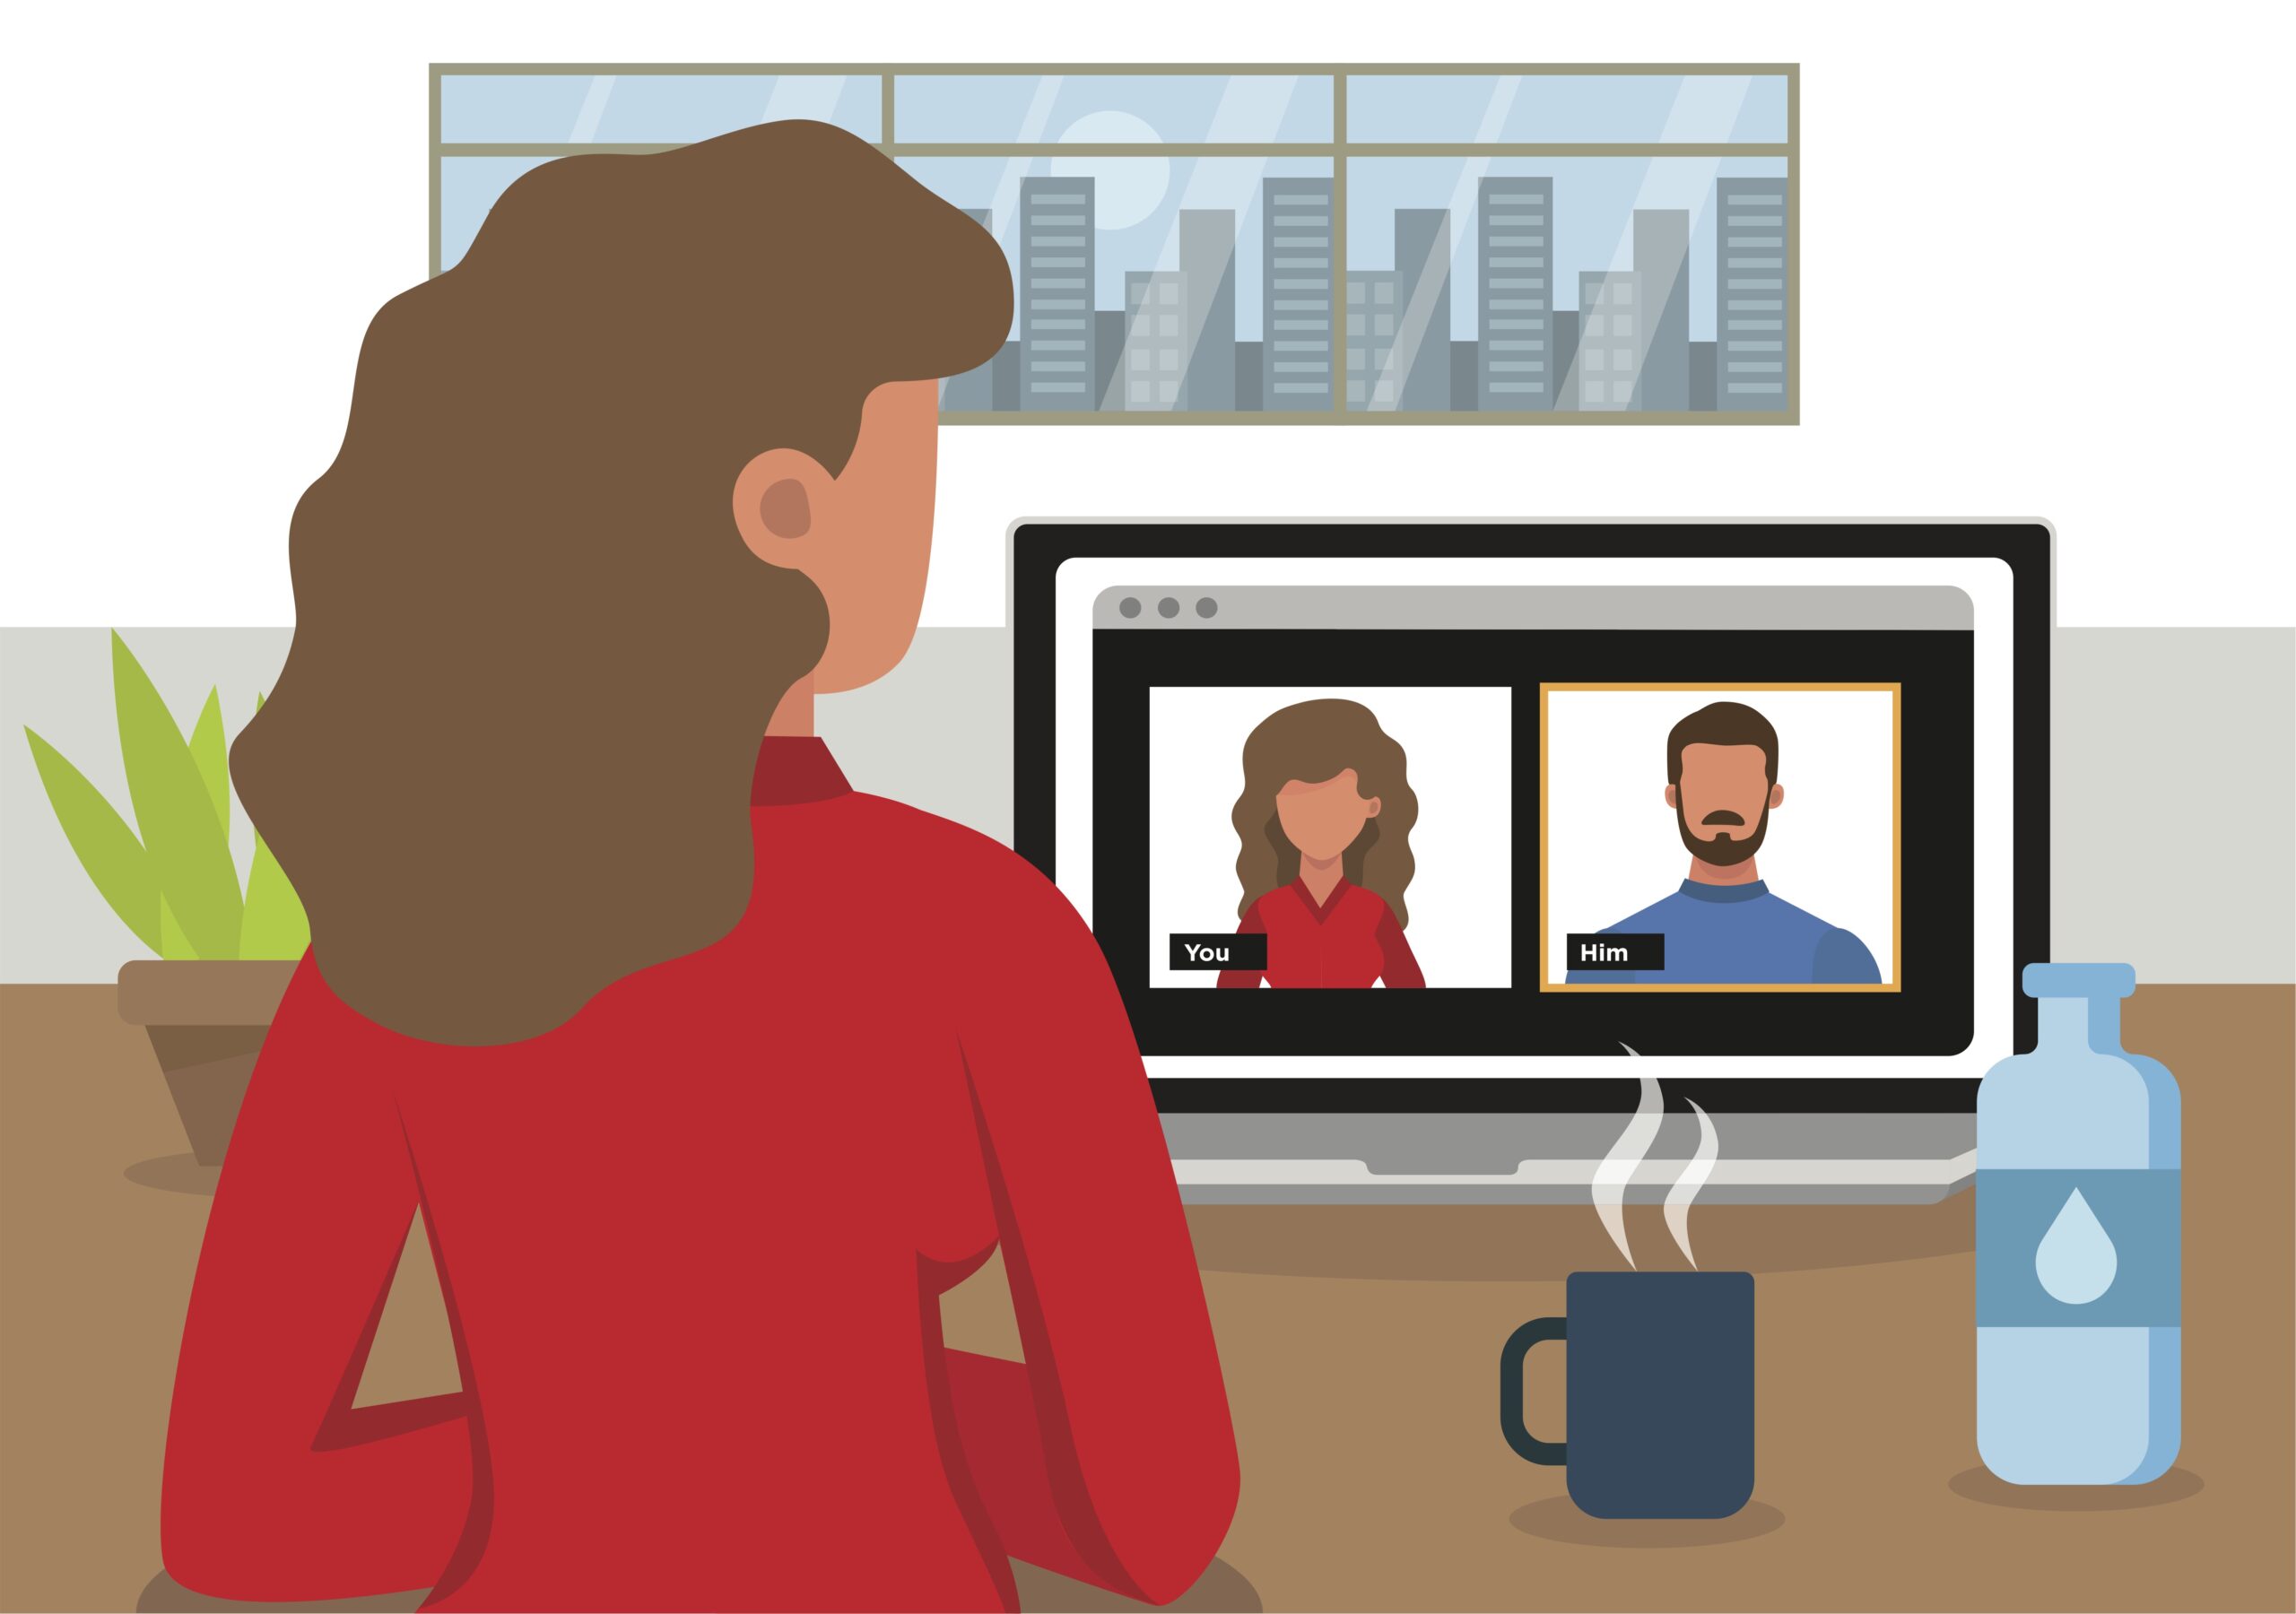 Vector image of woman on a virtual conference call speaking with 2 others.